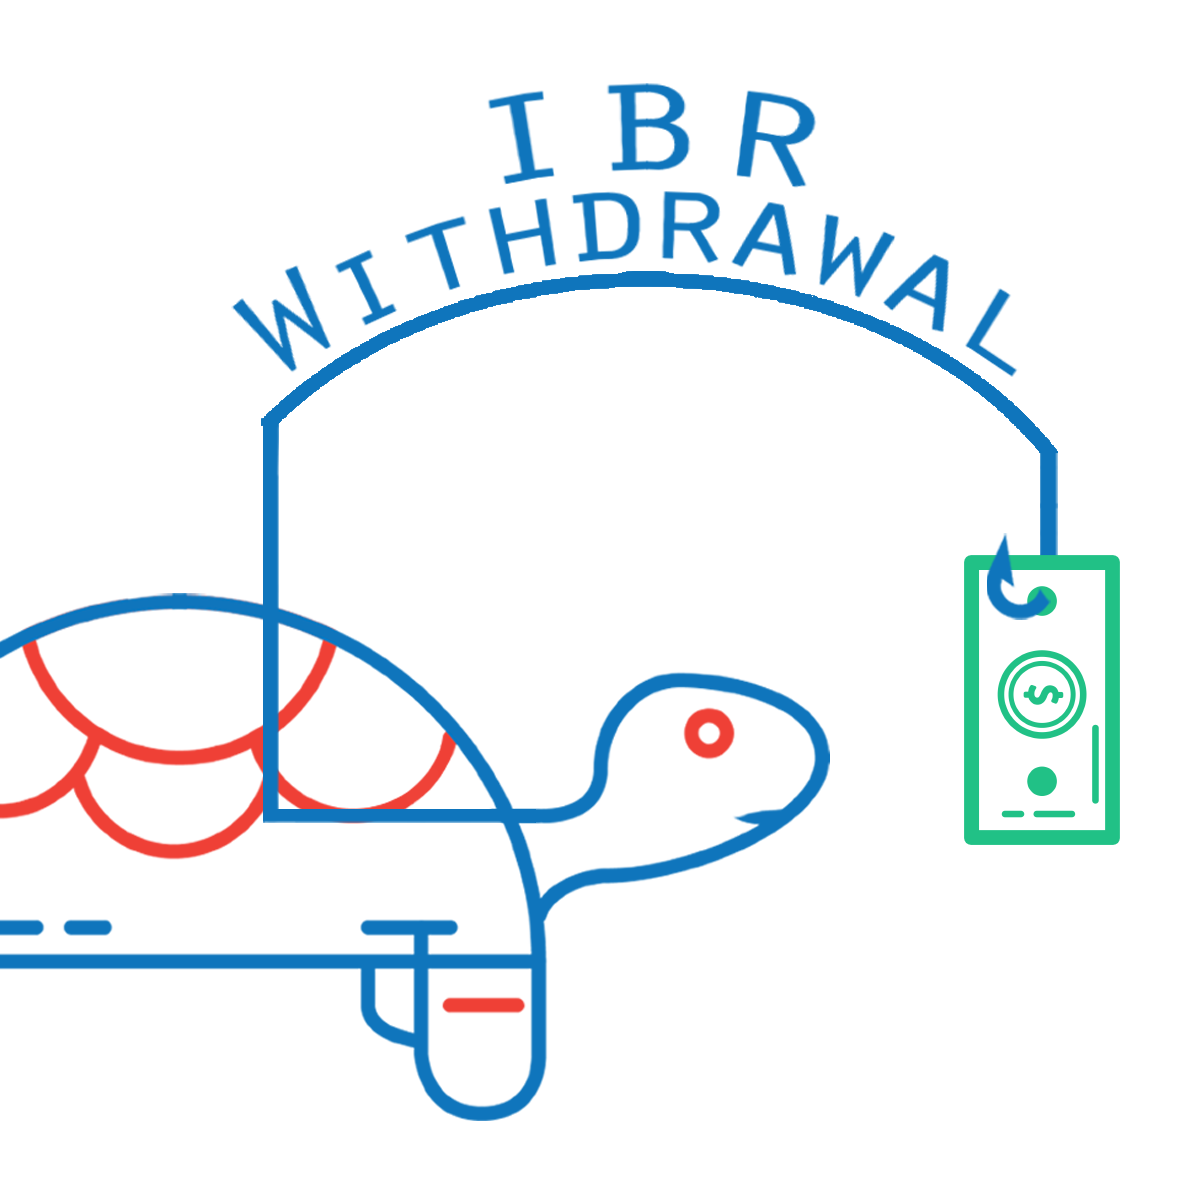 SCIF, CorVel IBR Withdrawal Requests Create ENORMOUS Hassles for Providers